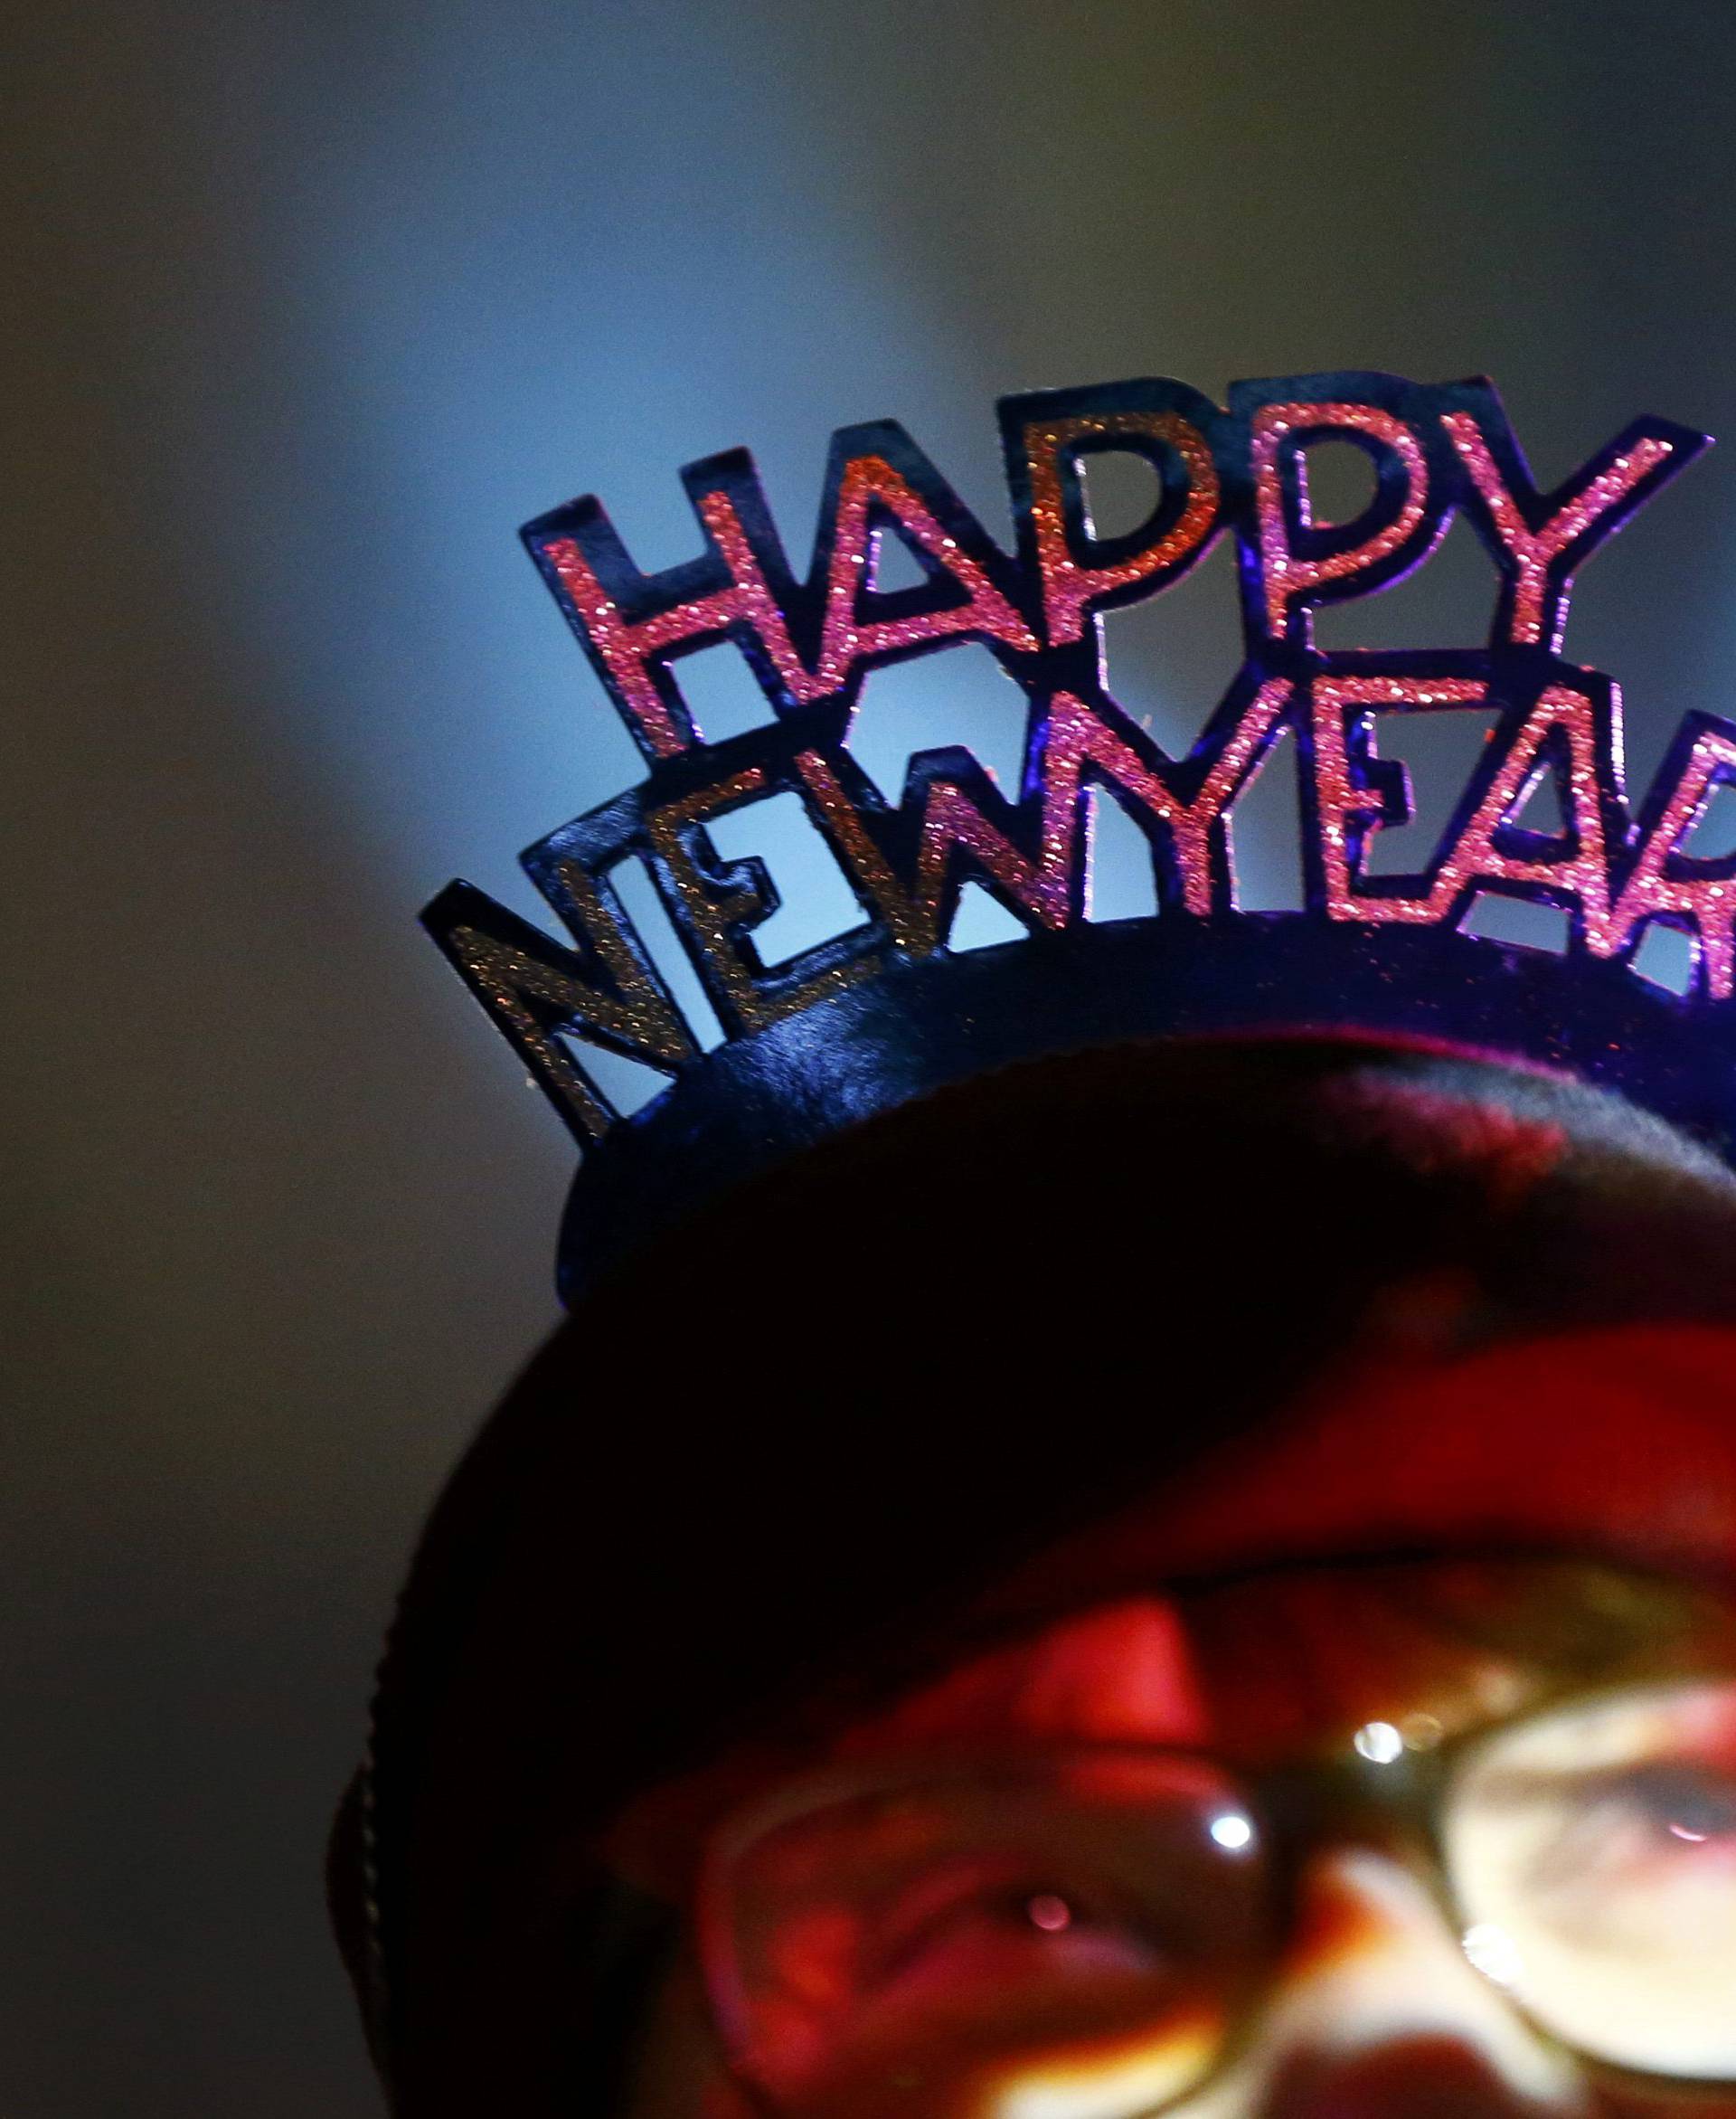 A woman waits for the New Year celebrations for 2017 in Cologne